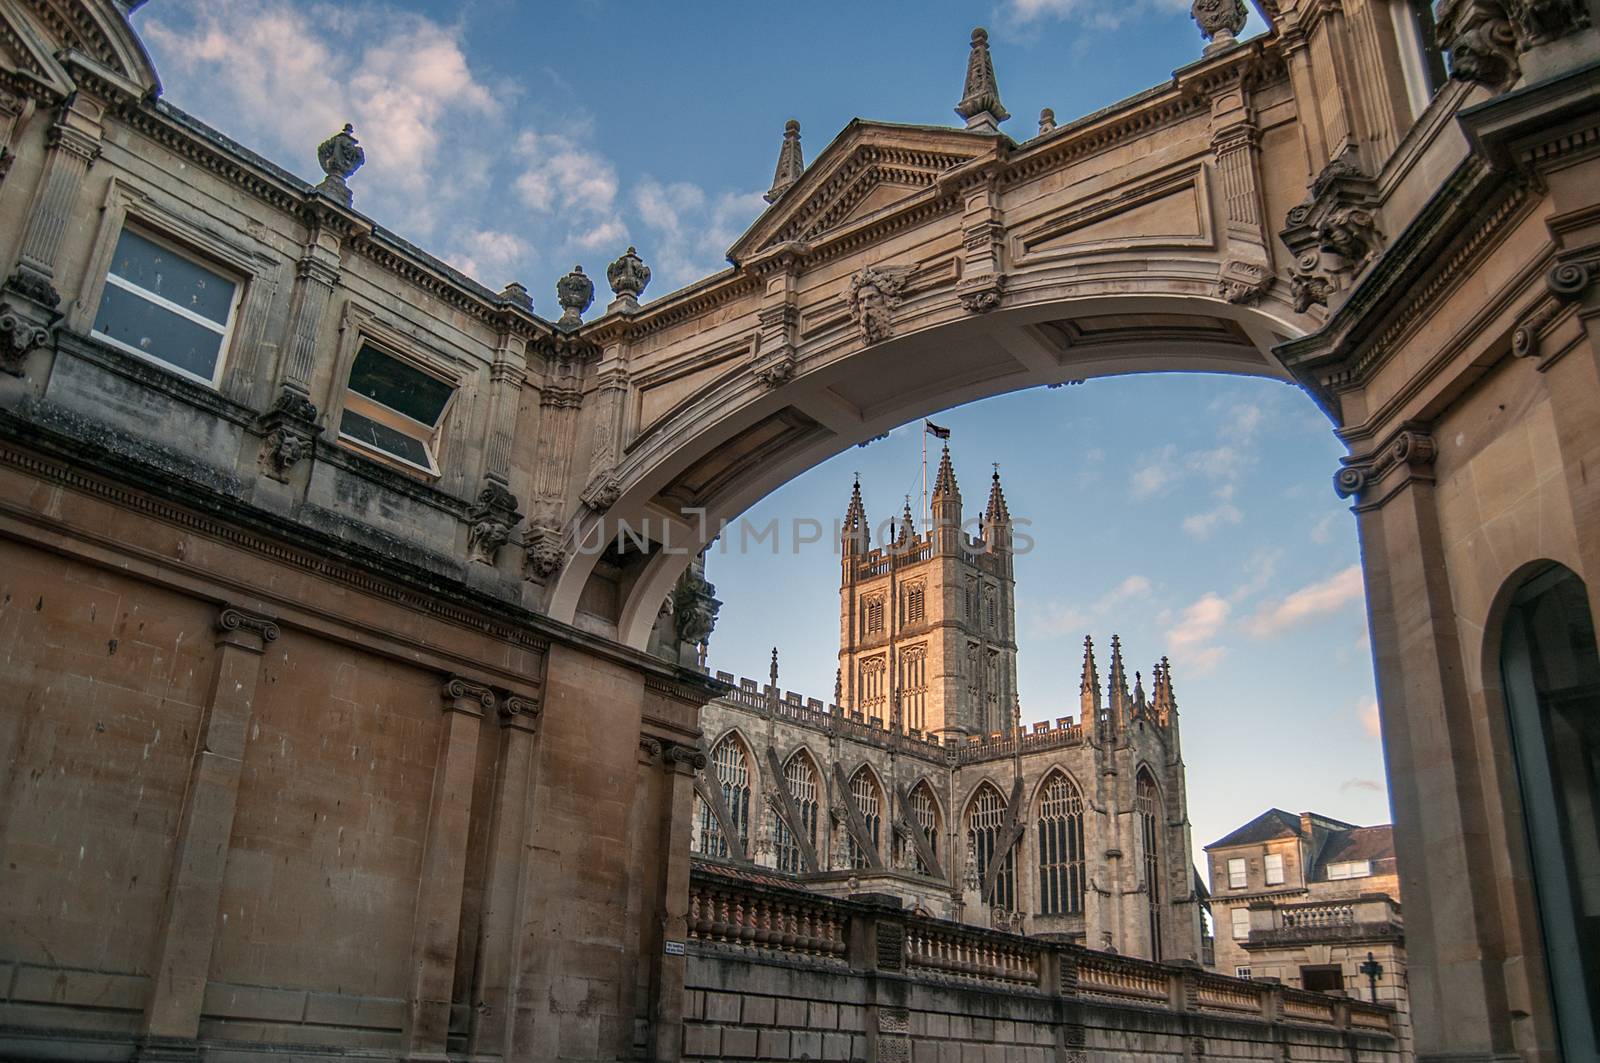 looking at bath abbey through and arch by sirspread